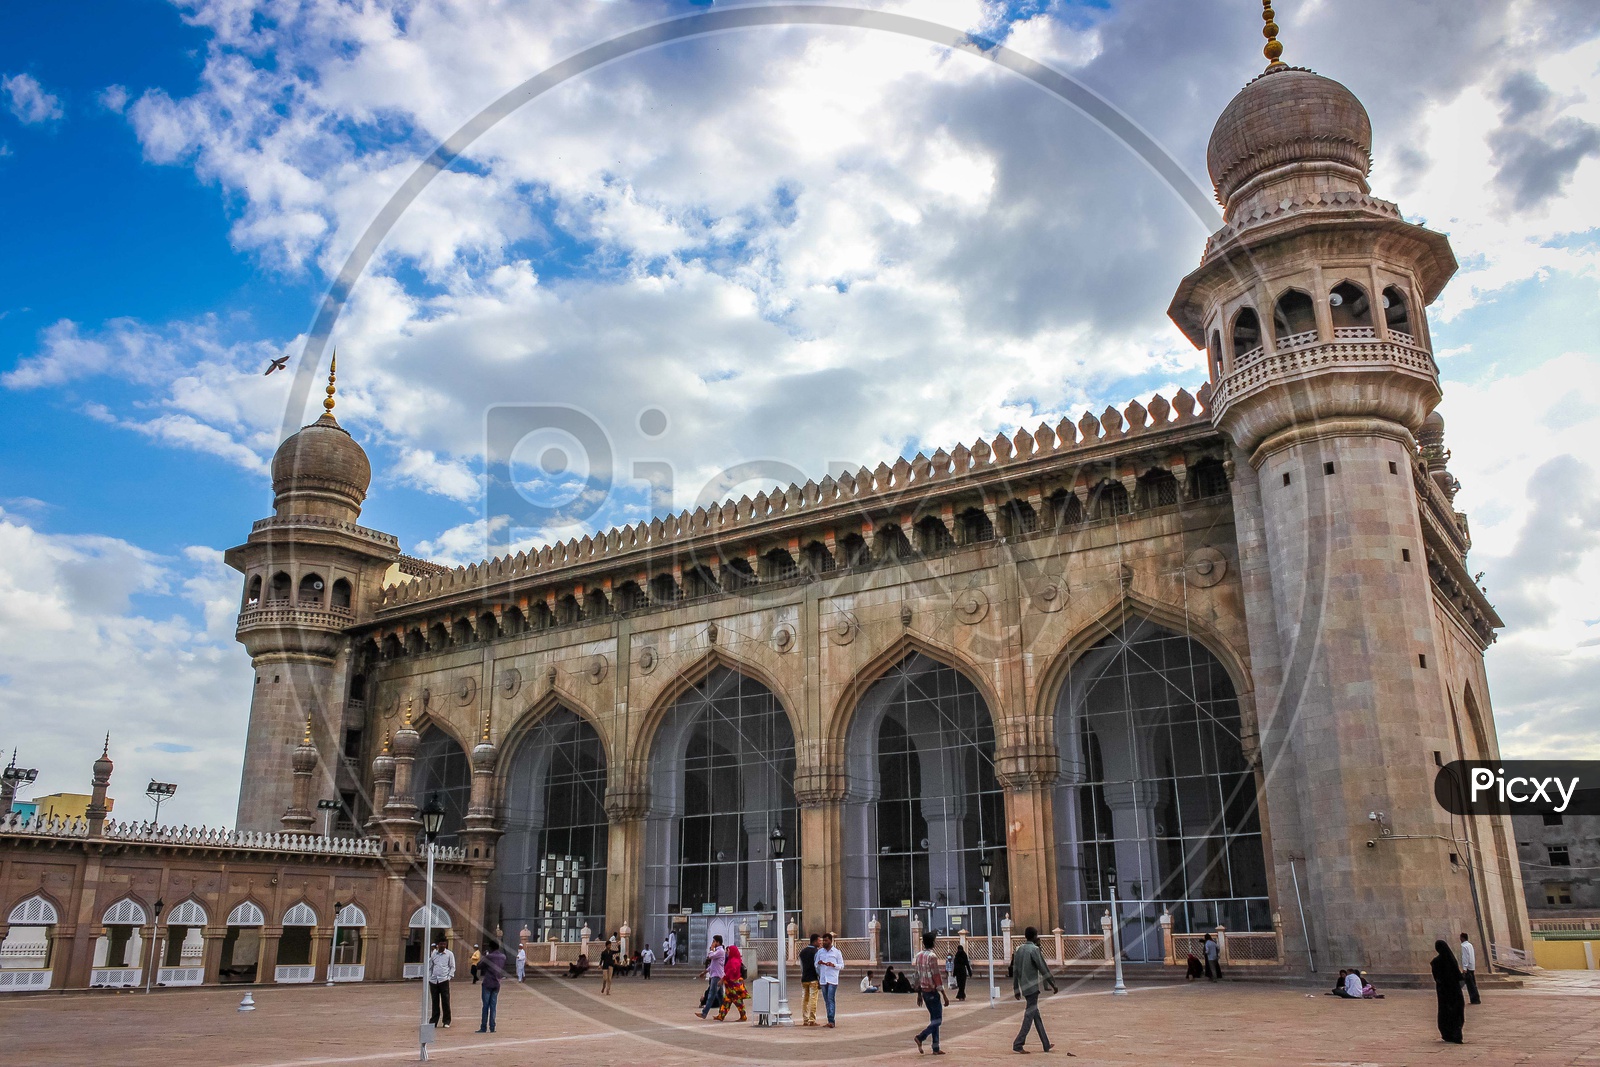 Architecture of Mecca Masjid with cloudy sky